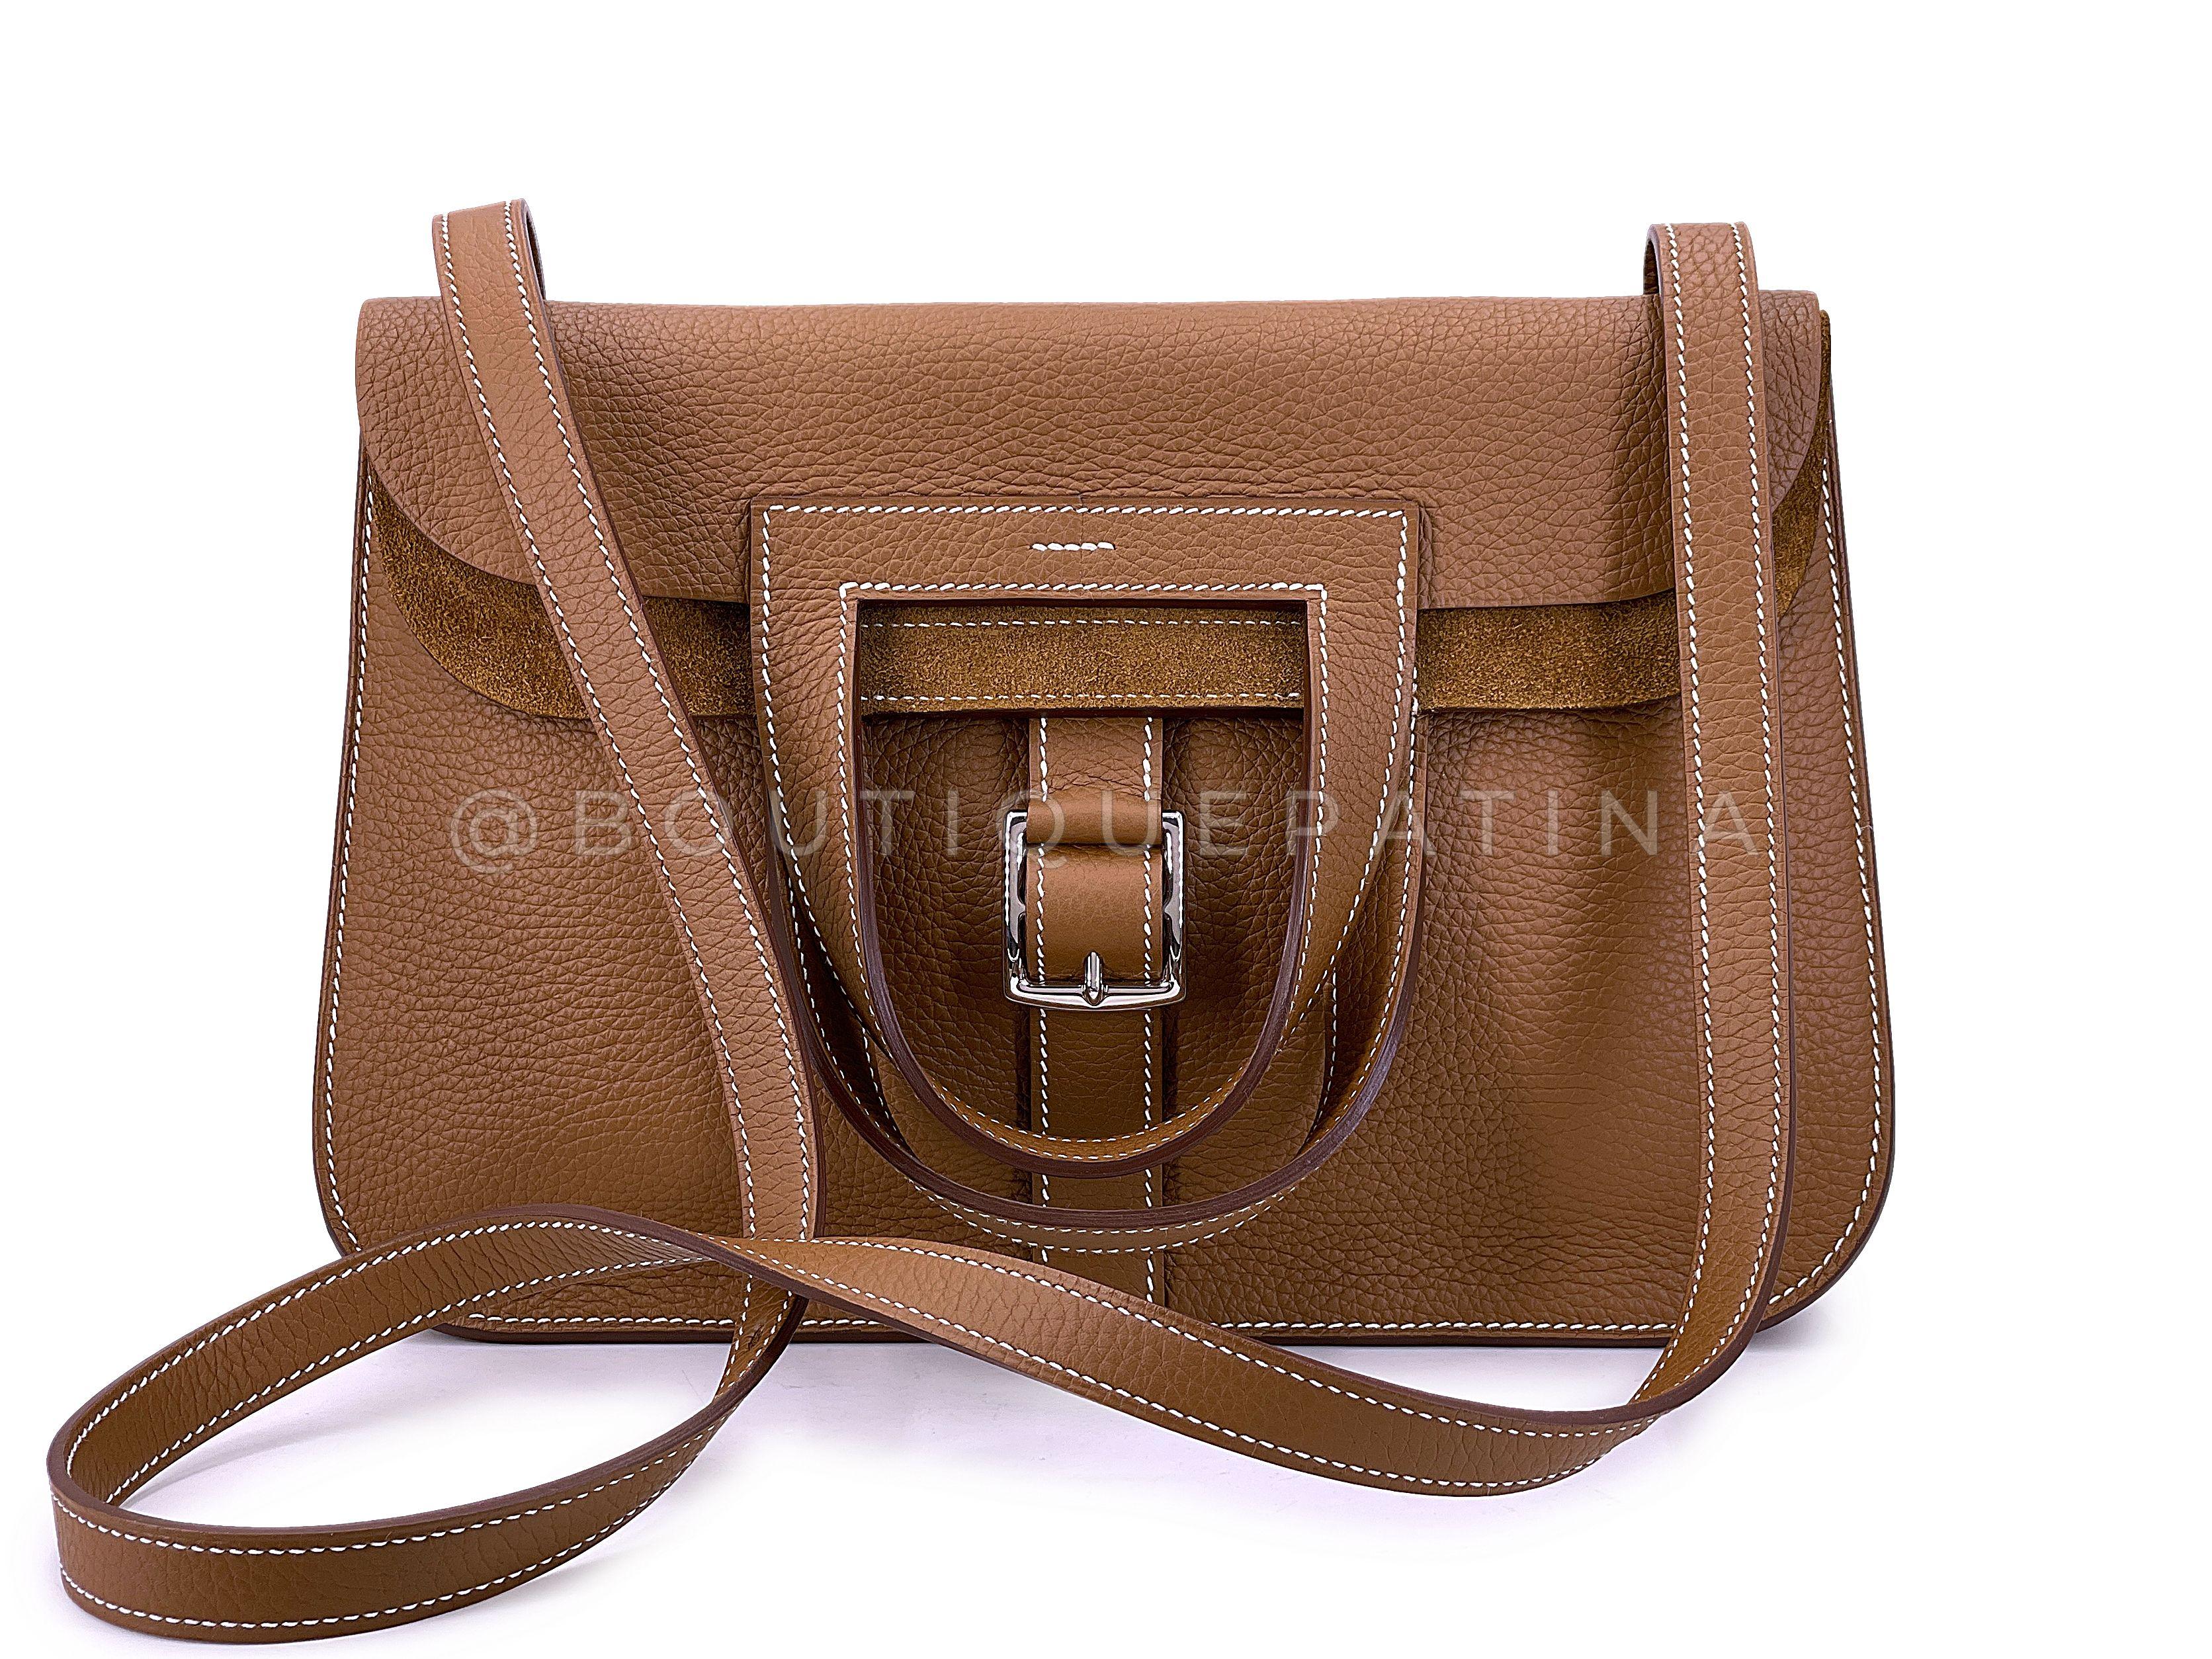 Store item: 67745
This Hermès Alezan H Halzan 4-way Buckled Shoulder Bag is extremely difficult to find in the boutiques.

Known and coveted for its versatility, the bag can be carried in four different ways: As a shoulder clutch, as a short handled